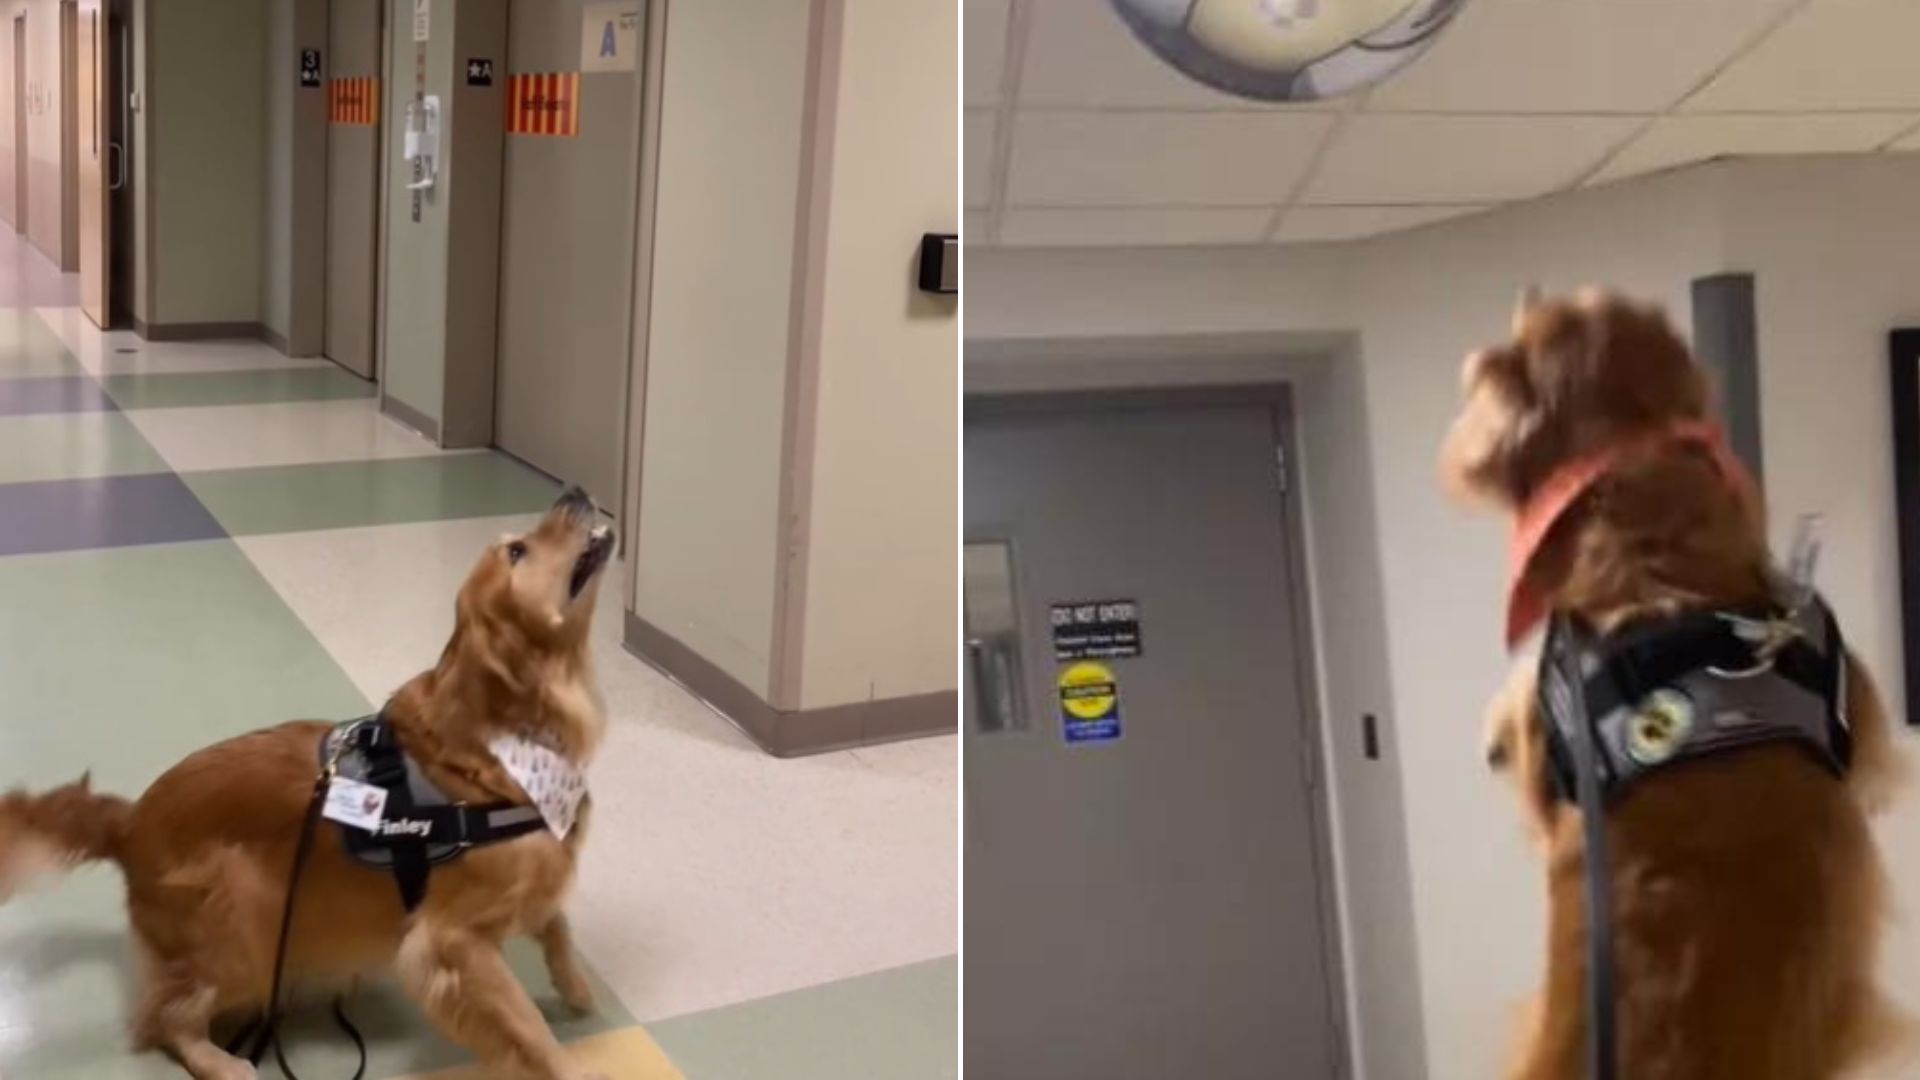 Witness This Therapy Dog’s Hilarious Battle With A ‘Mysterious Dog’ In A Mirror